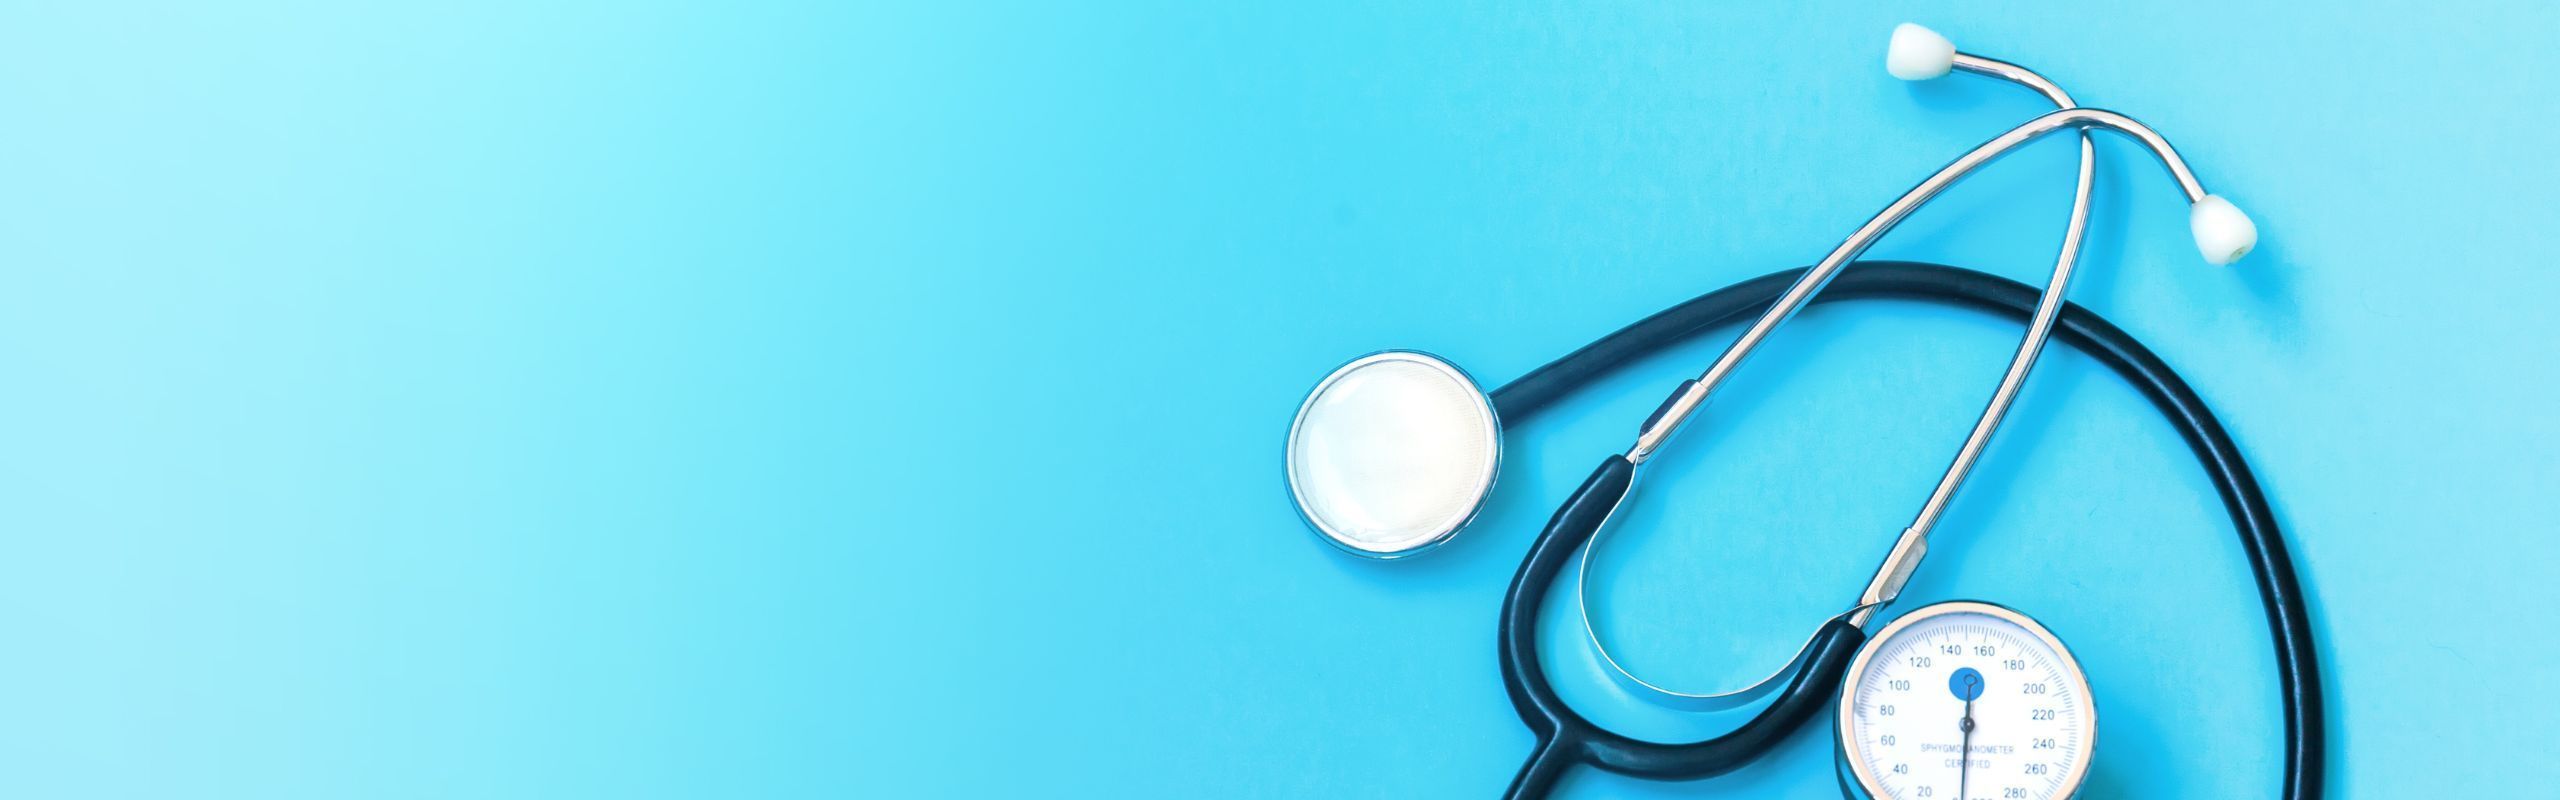 Image of stethoscope against a blue background